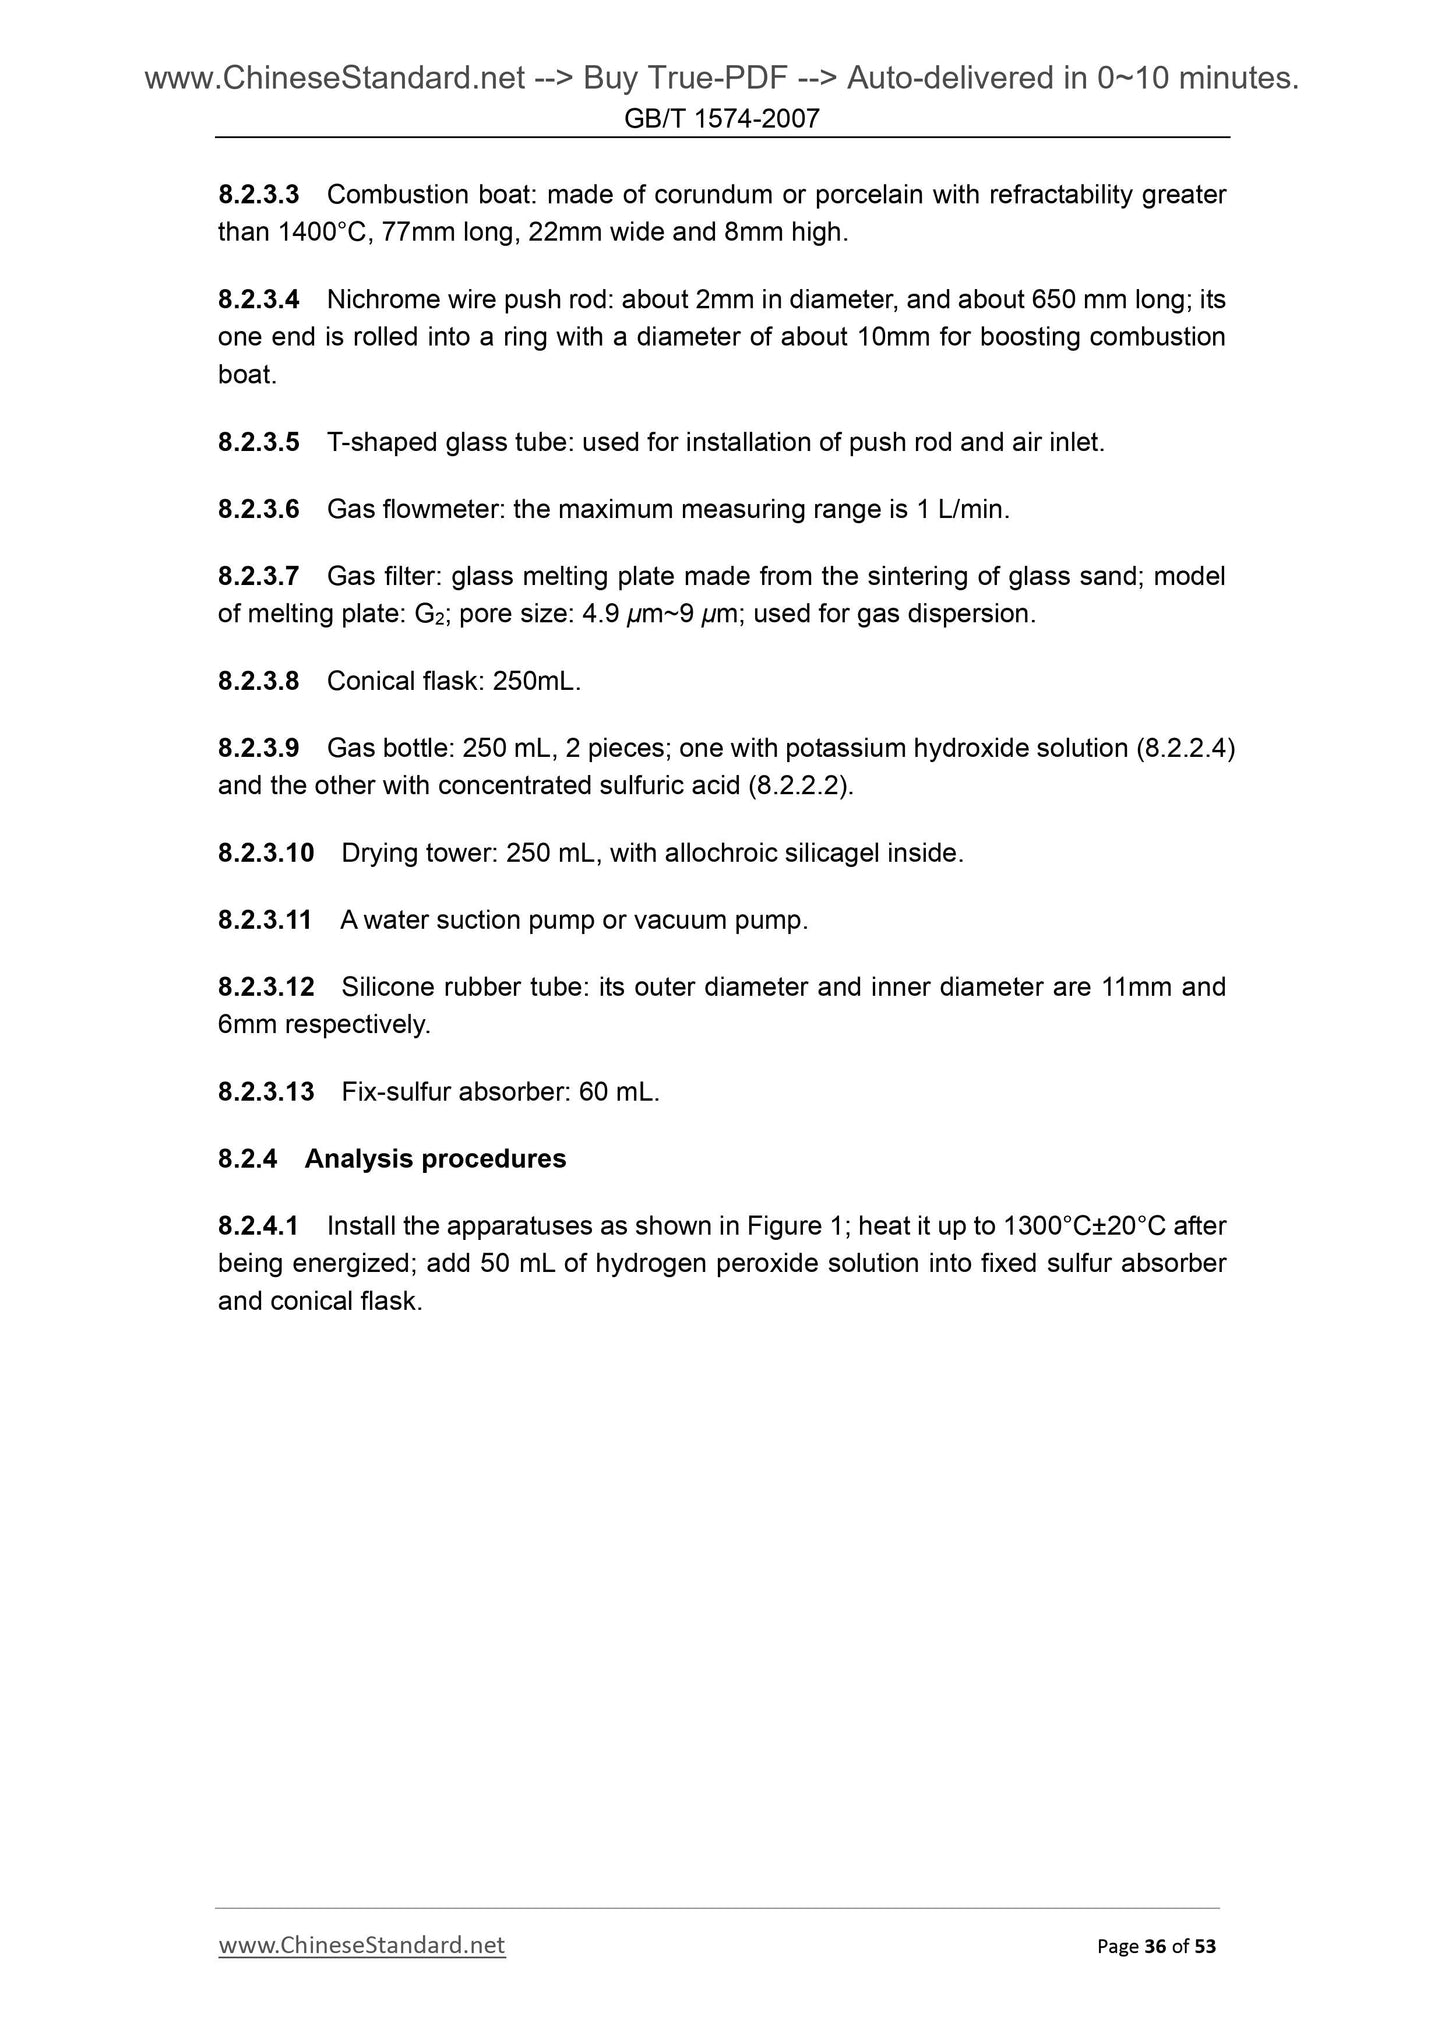 GB/T 1574-2007 Page 11